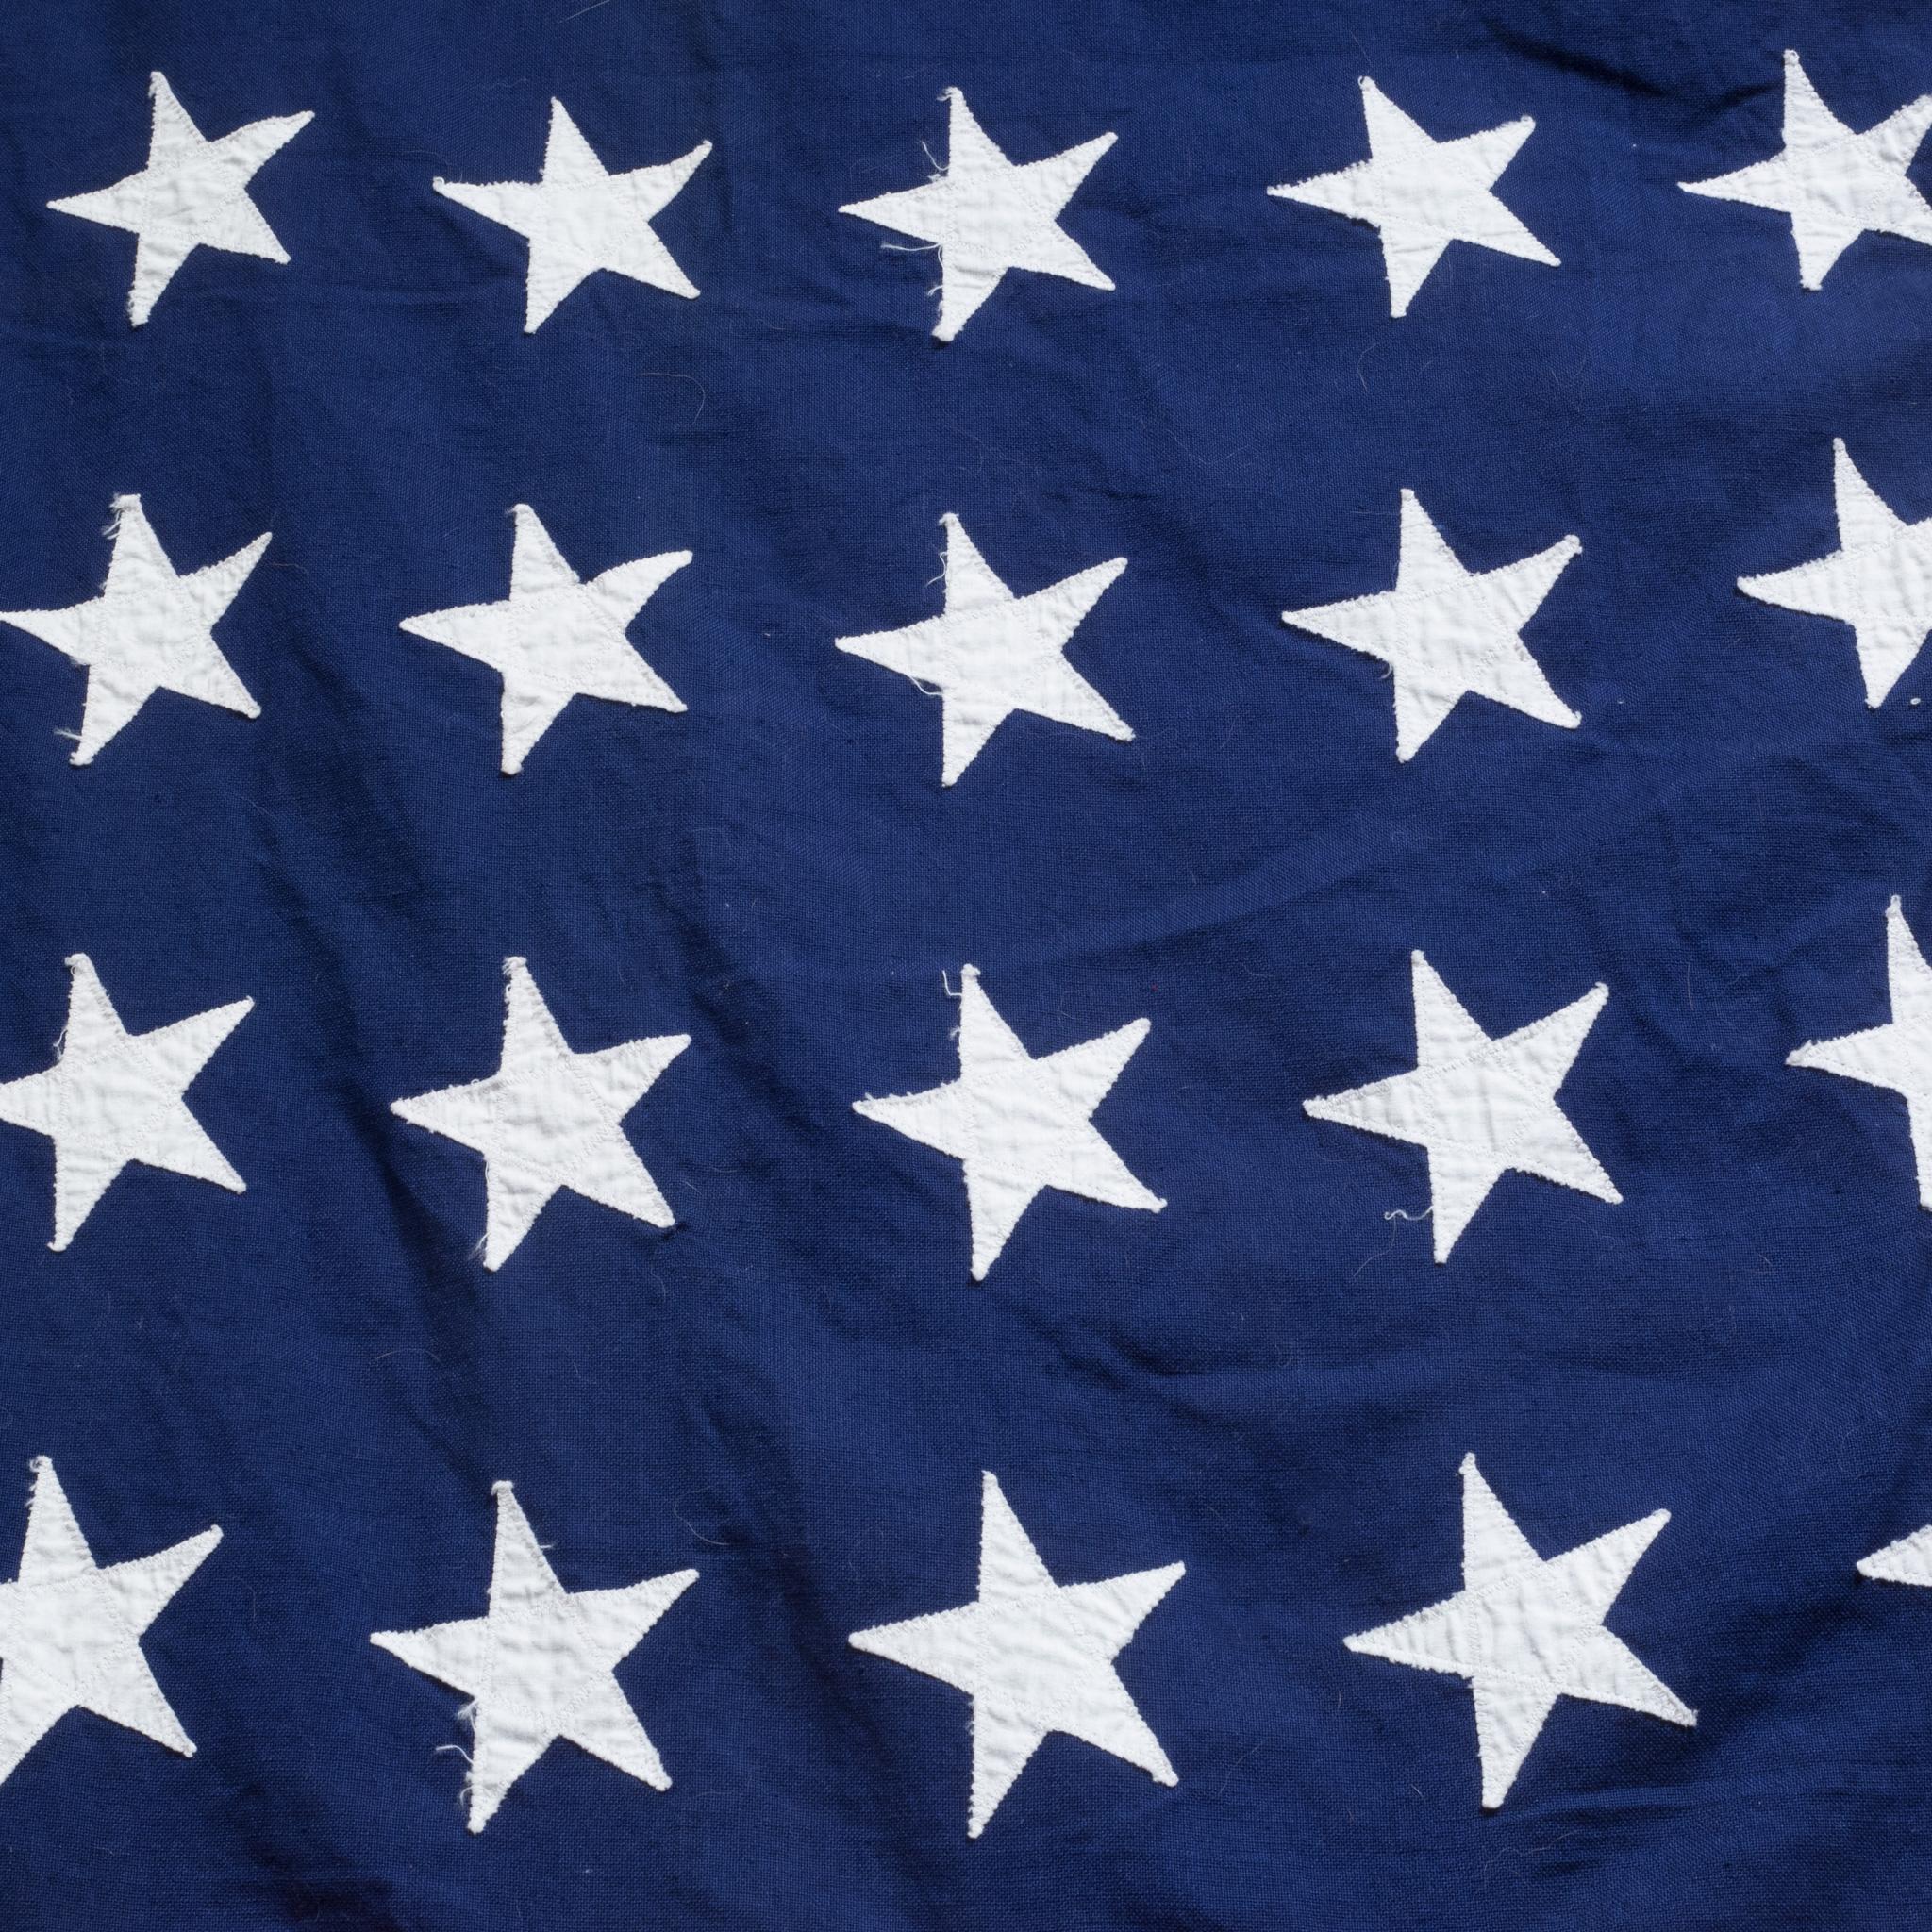 Industrial Early 20th c. Monumental American Flag with 48 Stars, c.1940-1950 For Sale